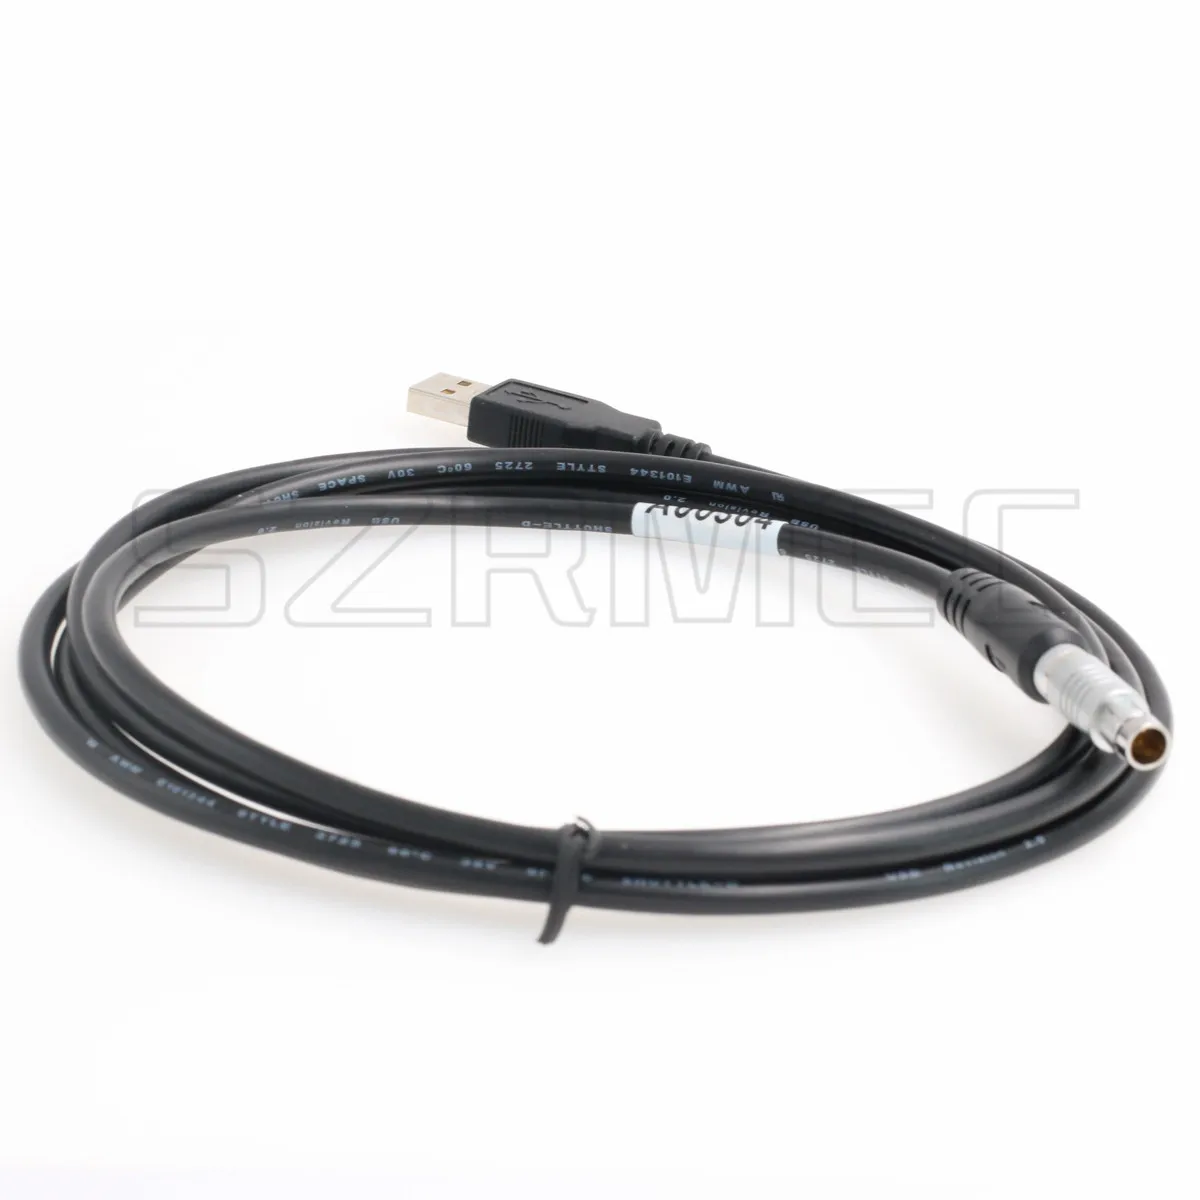 

Fischer 5 pin Male to USB A00304 Data and Power Cable for Topcon Hiper V II Pro GB GR GPS